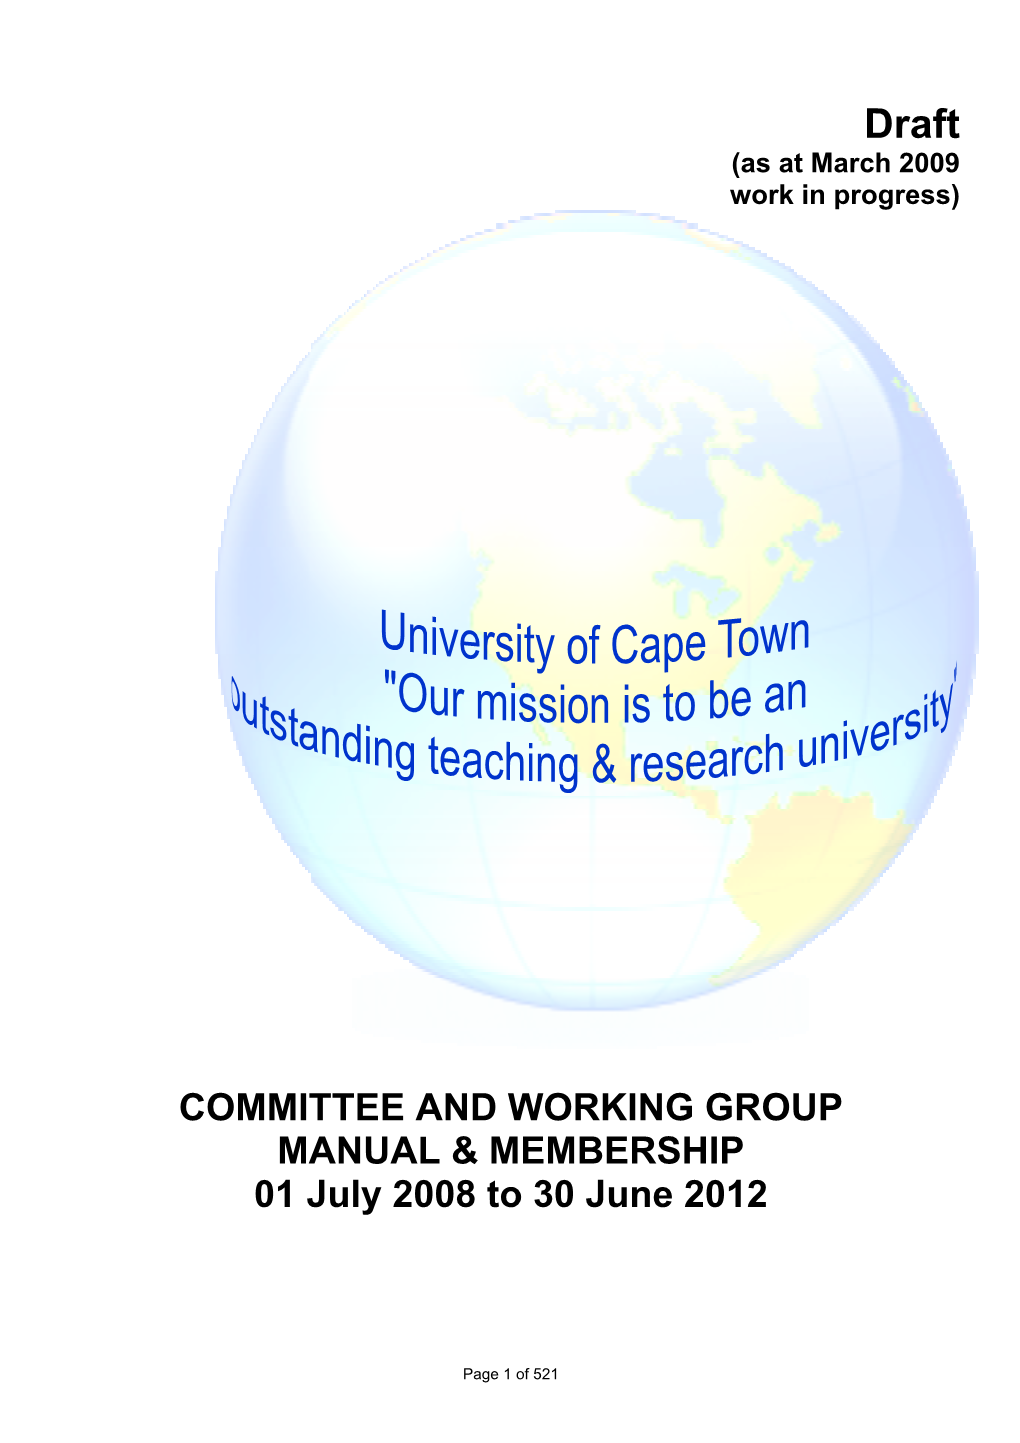 COMMITTEE and WORKING GROUP MANUAL & MEMBERSHIP 01 July